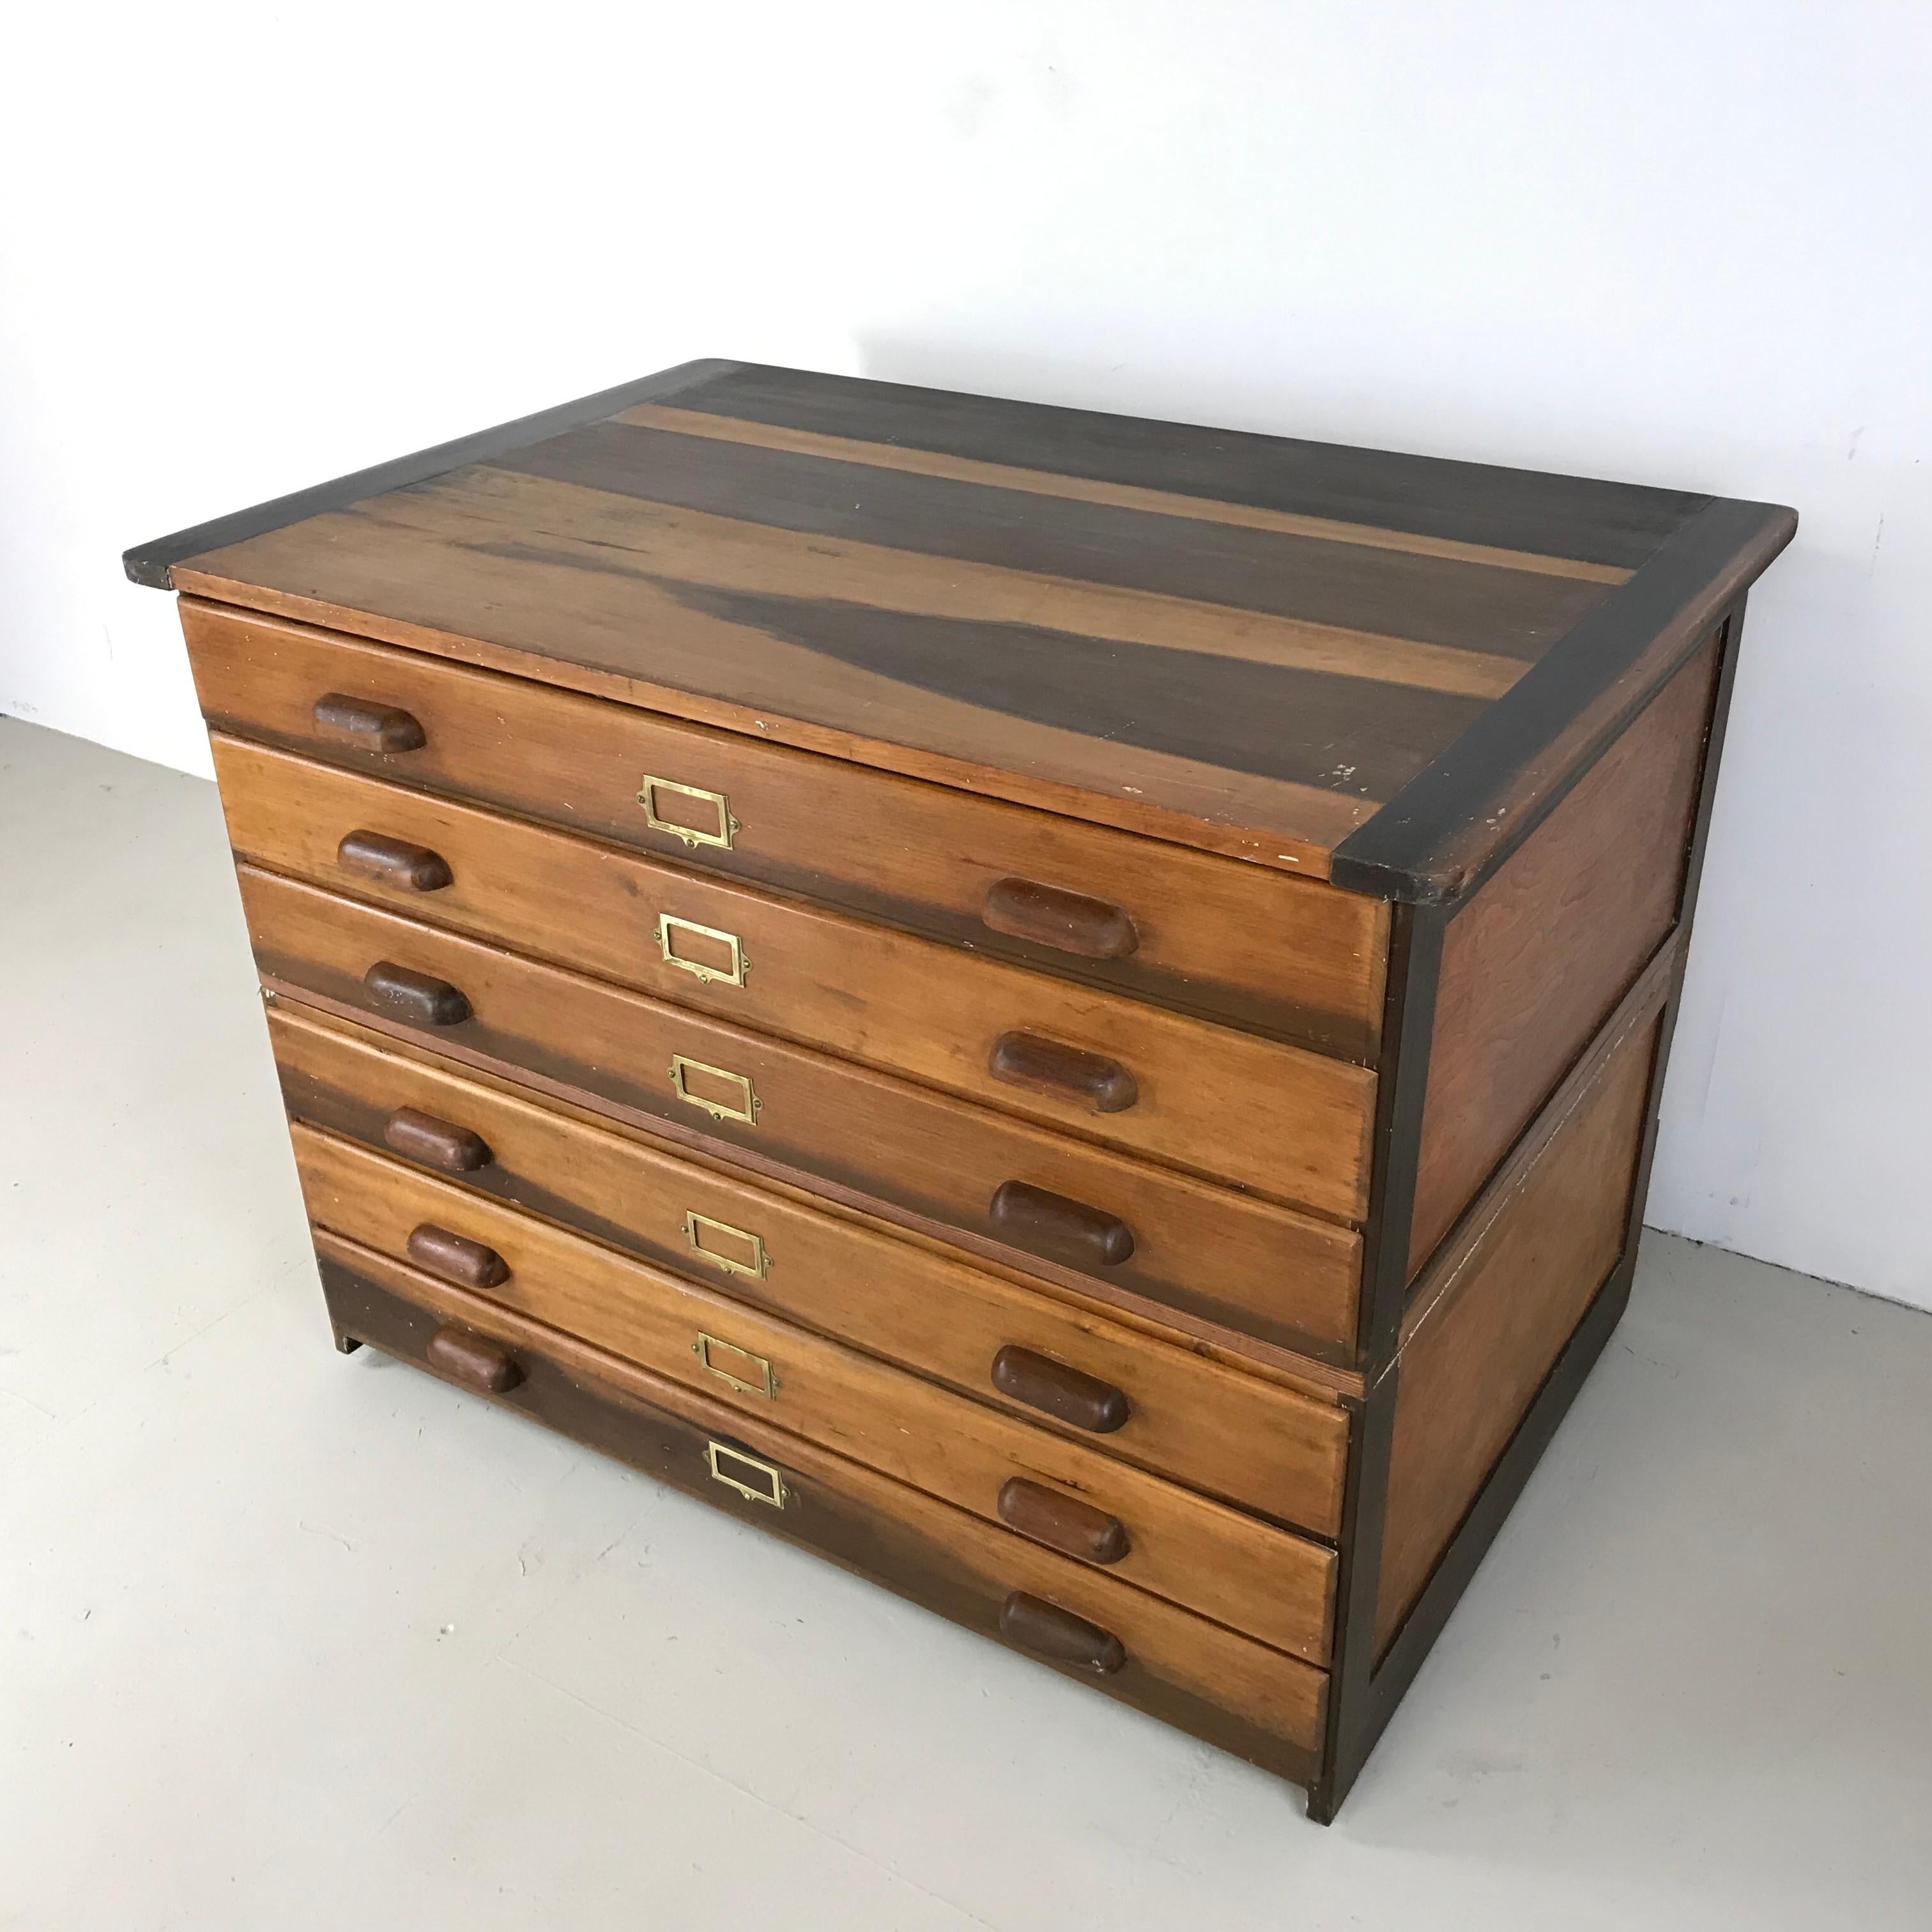 1930s Plan Chest with Brass Cup Handles and Label Inserts 2